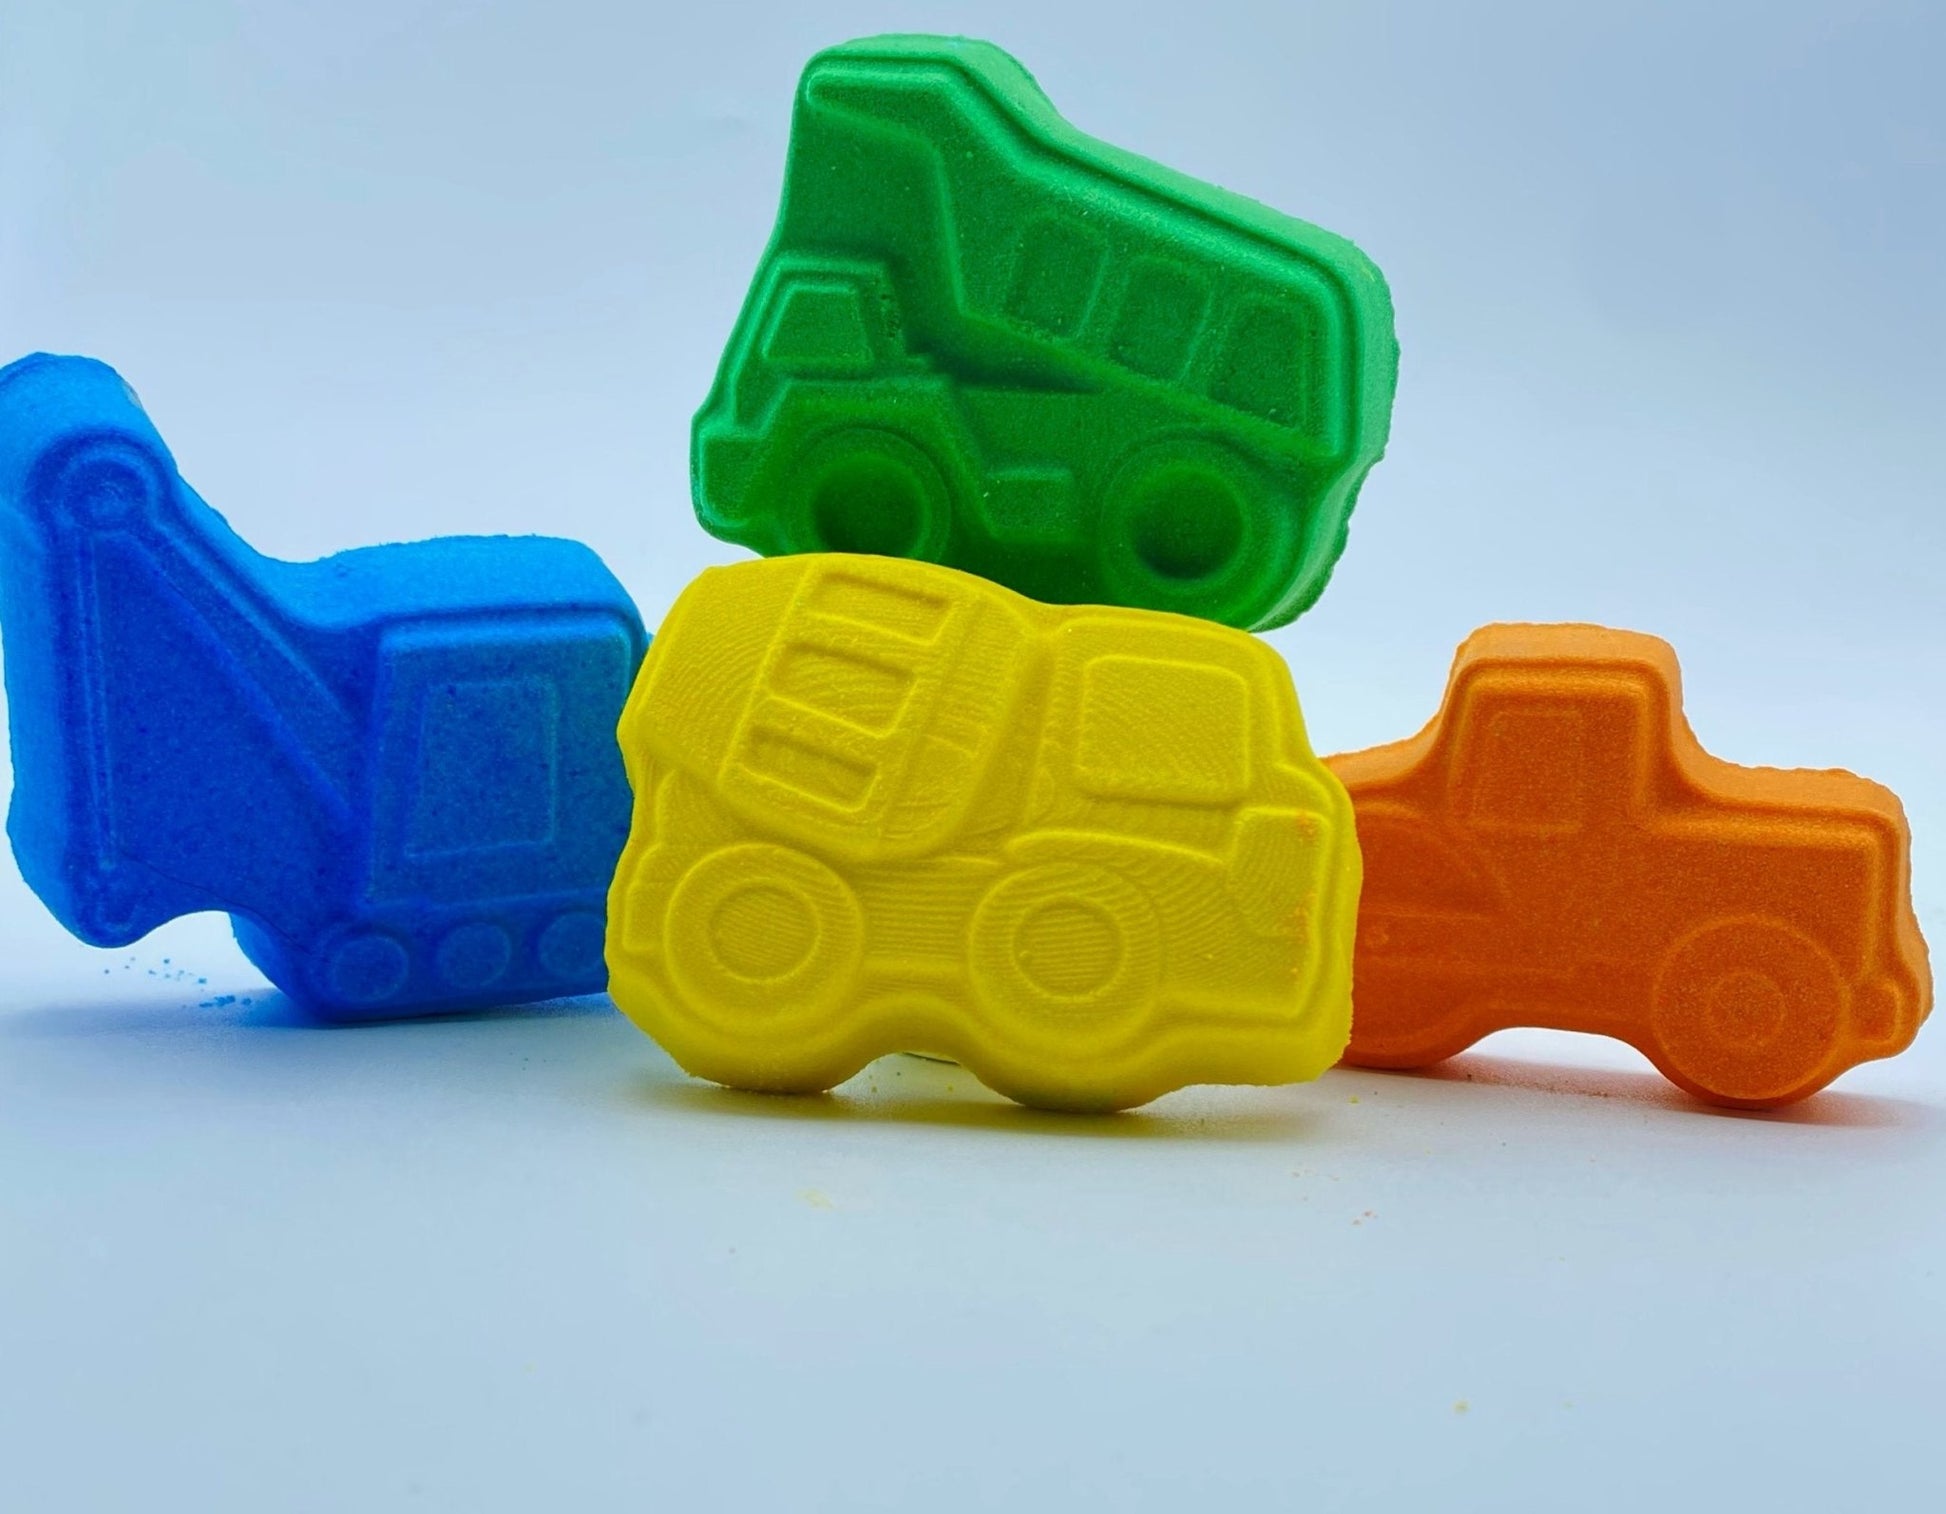 Construction Vehicle Bath Bombs with Worker Toy Inside Gift Pack - 4 ct - Berwyn Betty's Bath & Body Shop